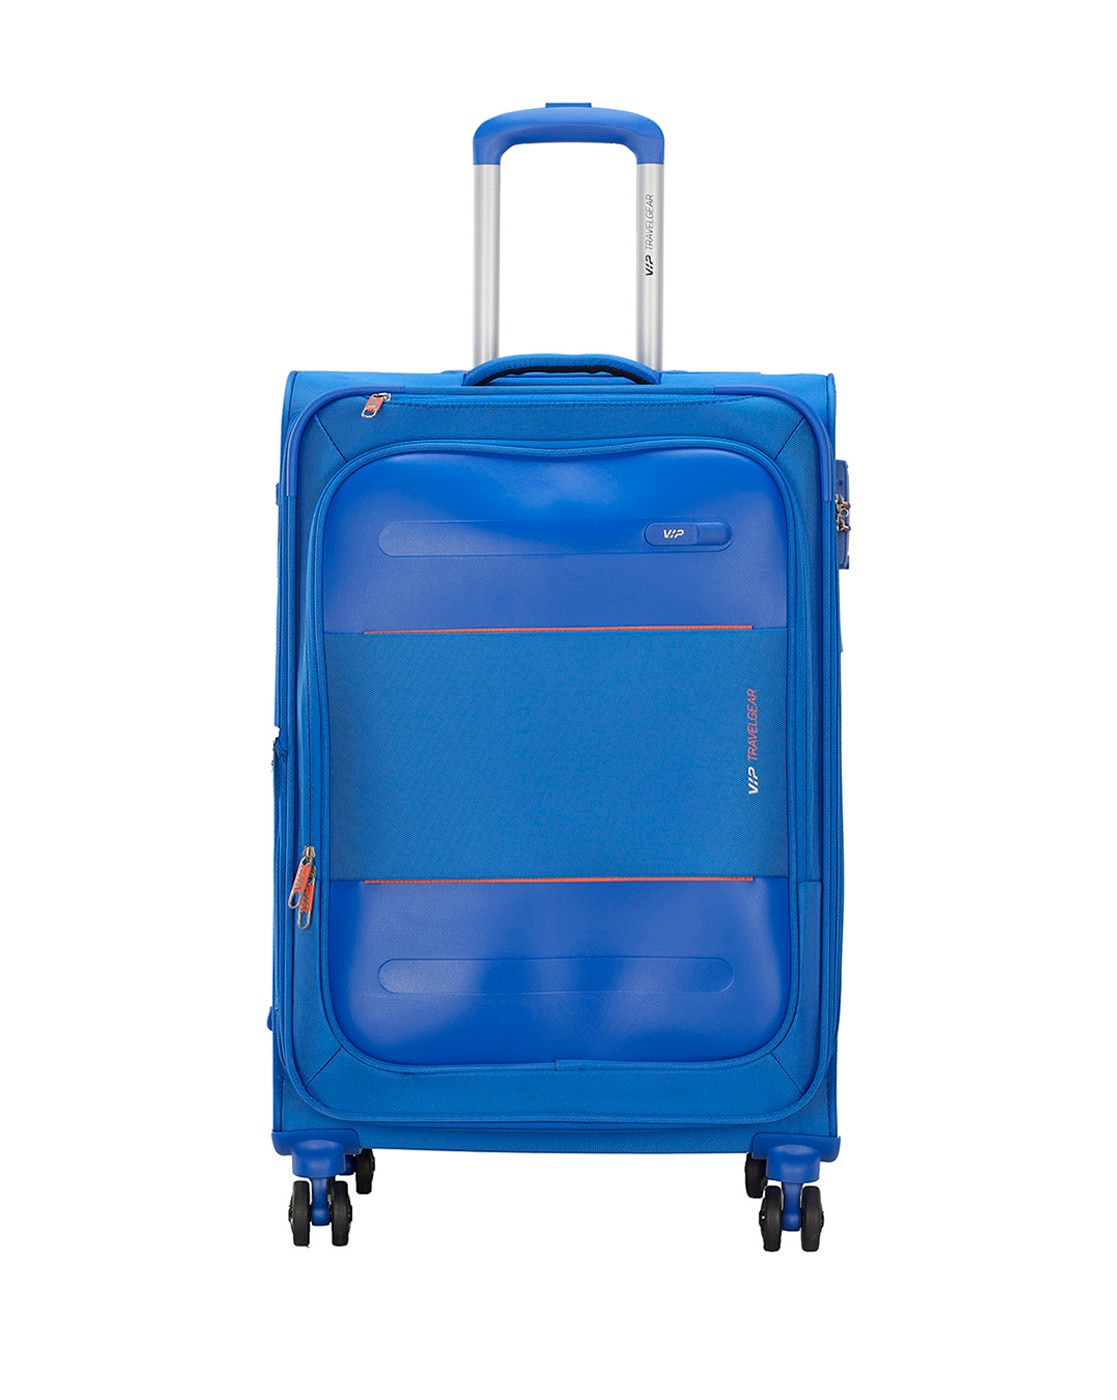 Parajohn Underseat Luggage Bag, 16''- Pilot Case Overnight Wheeled Luggage  Case Bag - Portable carry on Travel Weekend Trolley Bag - Rolling luggage  Travel Suitcase Bag